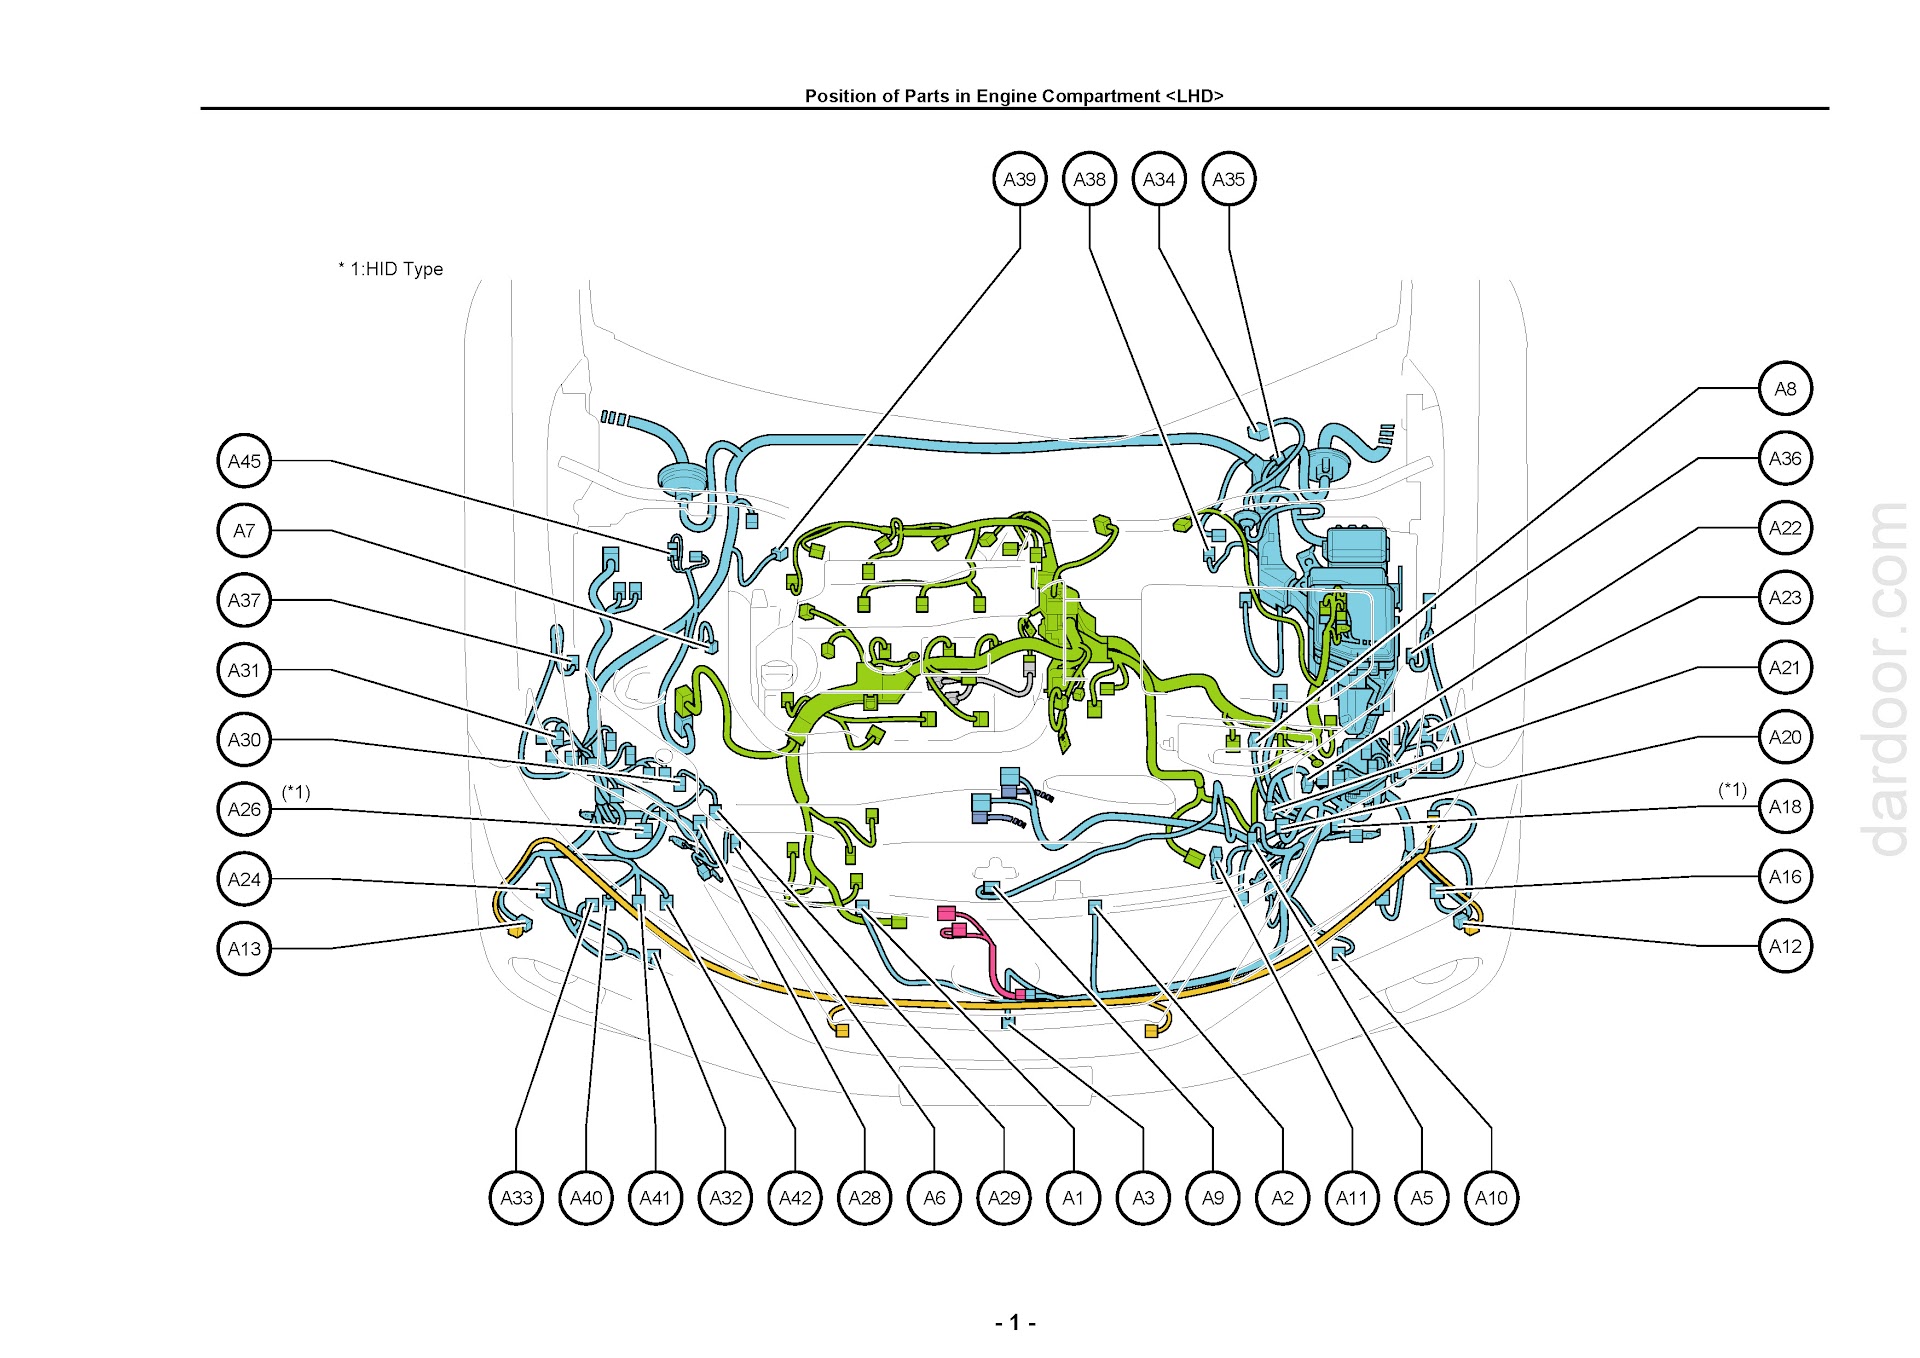 2015 Lexus RX450h Wiring Diagram, Position of Parts in Engine Room